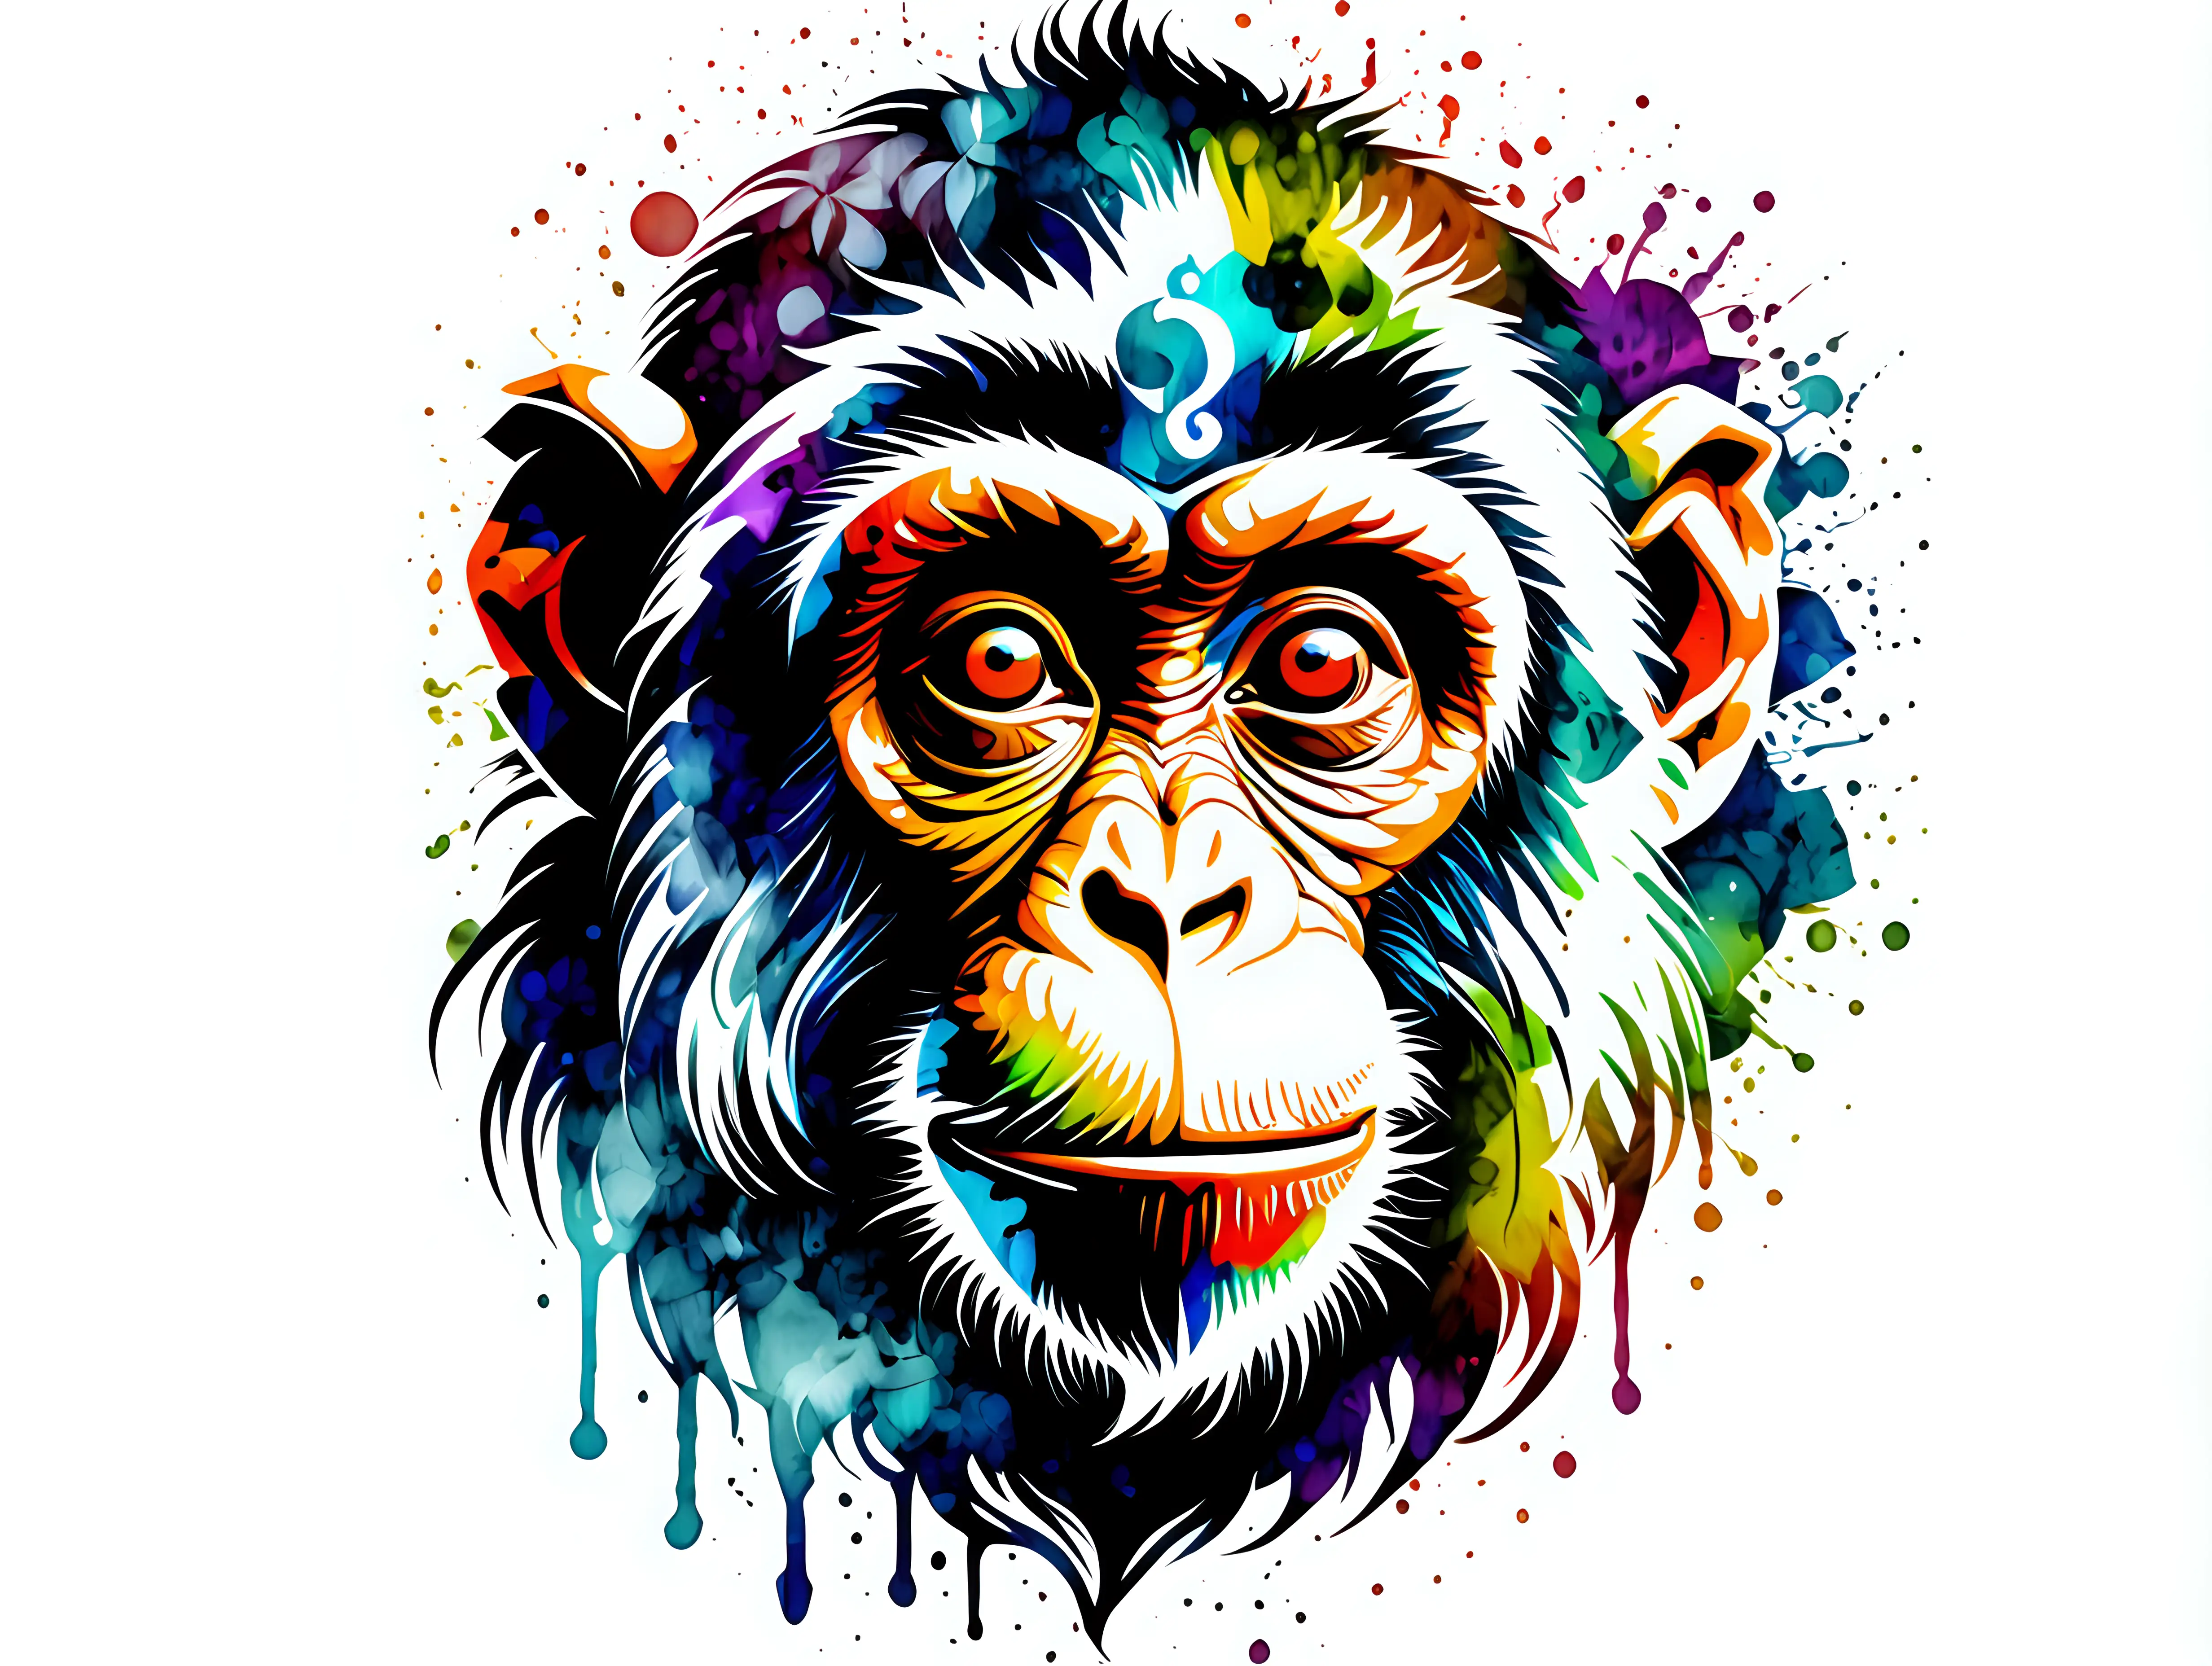 Psychedelic Multicolored Monkey TShirt Design in Aquarelle Style